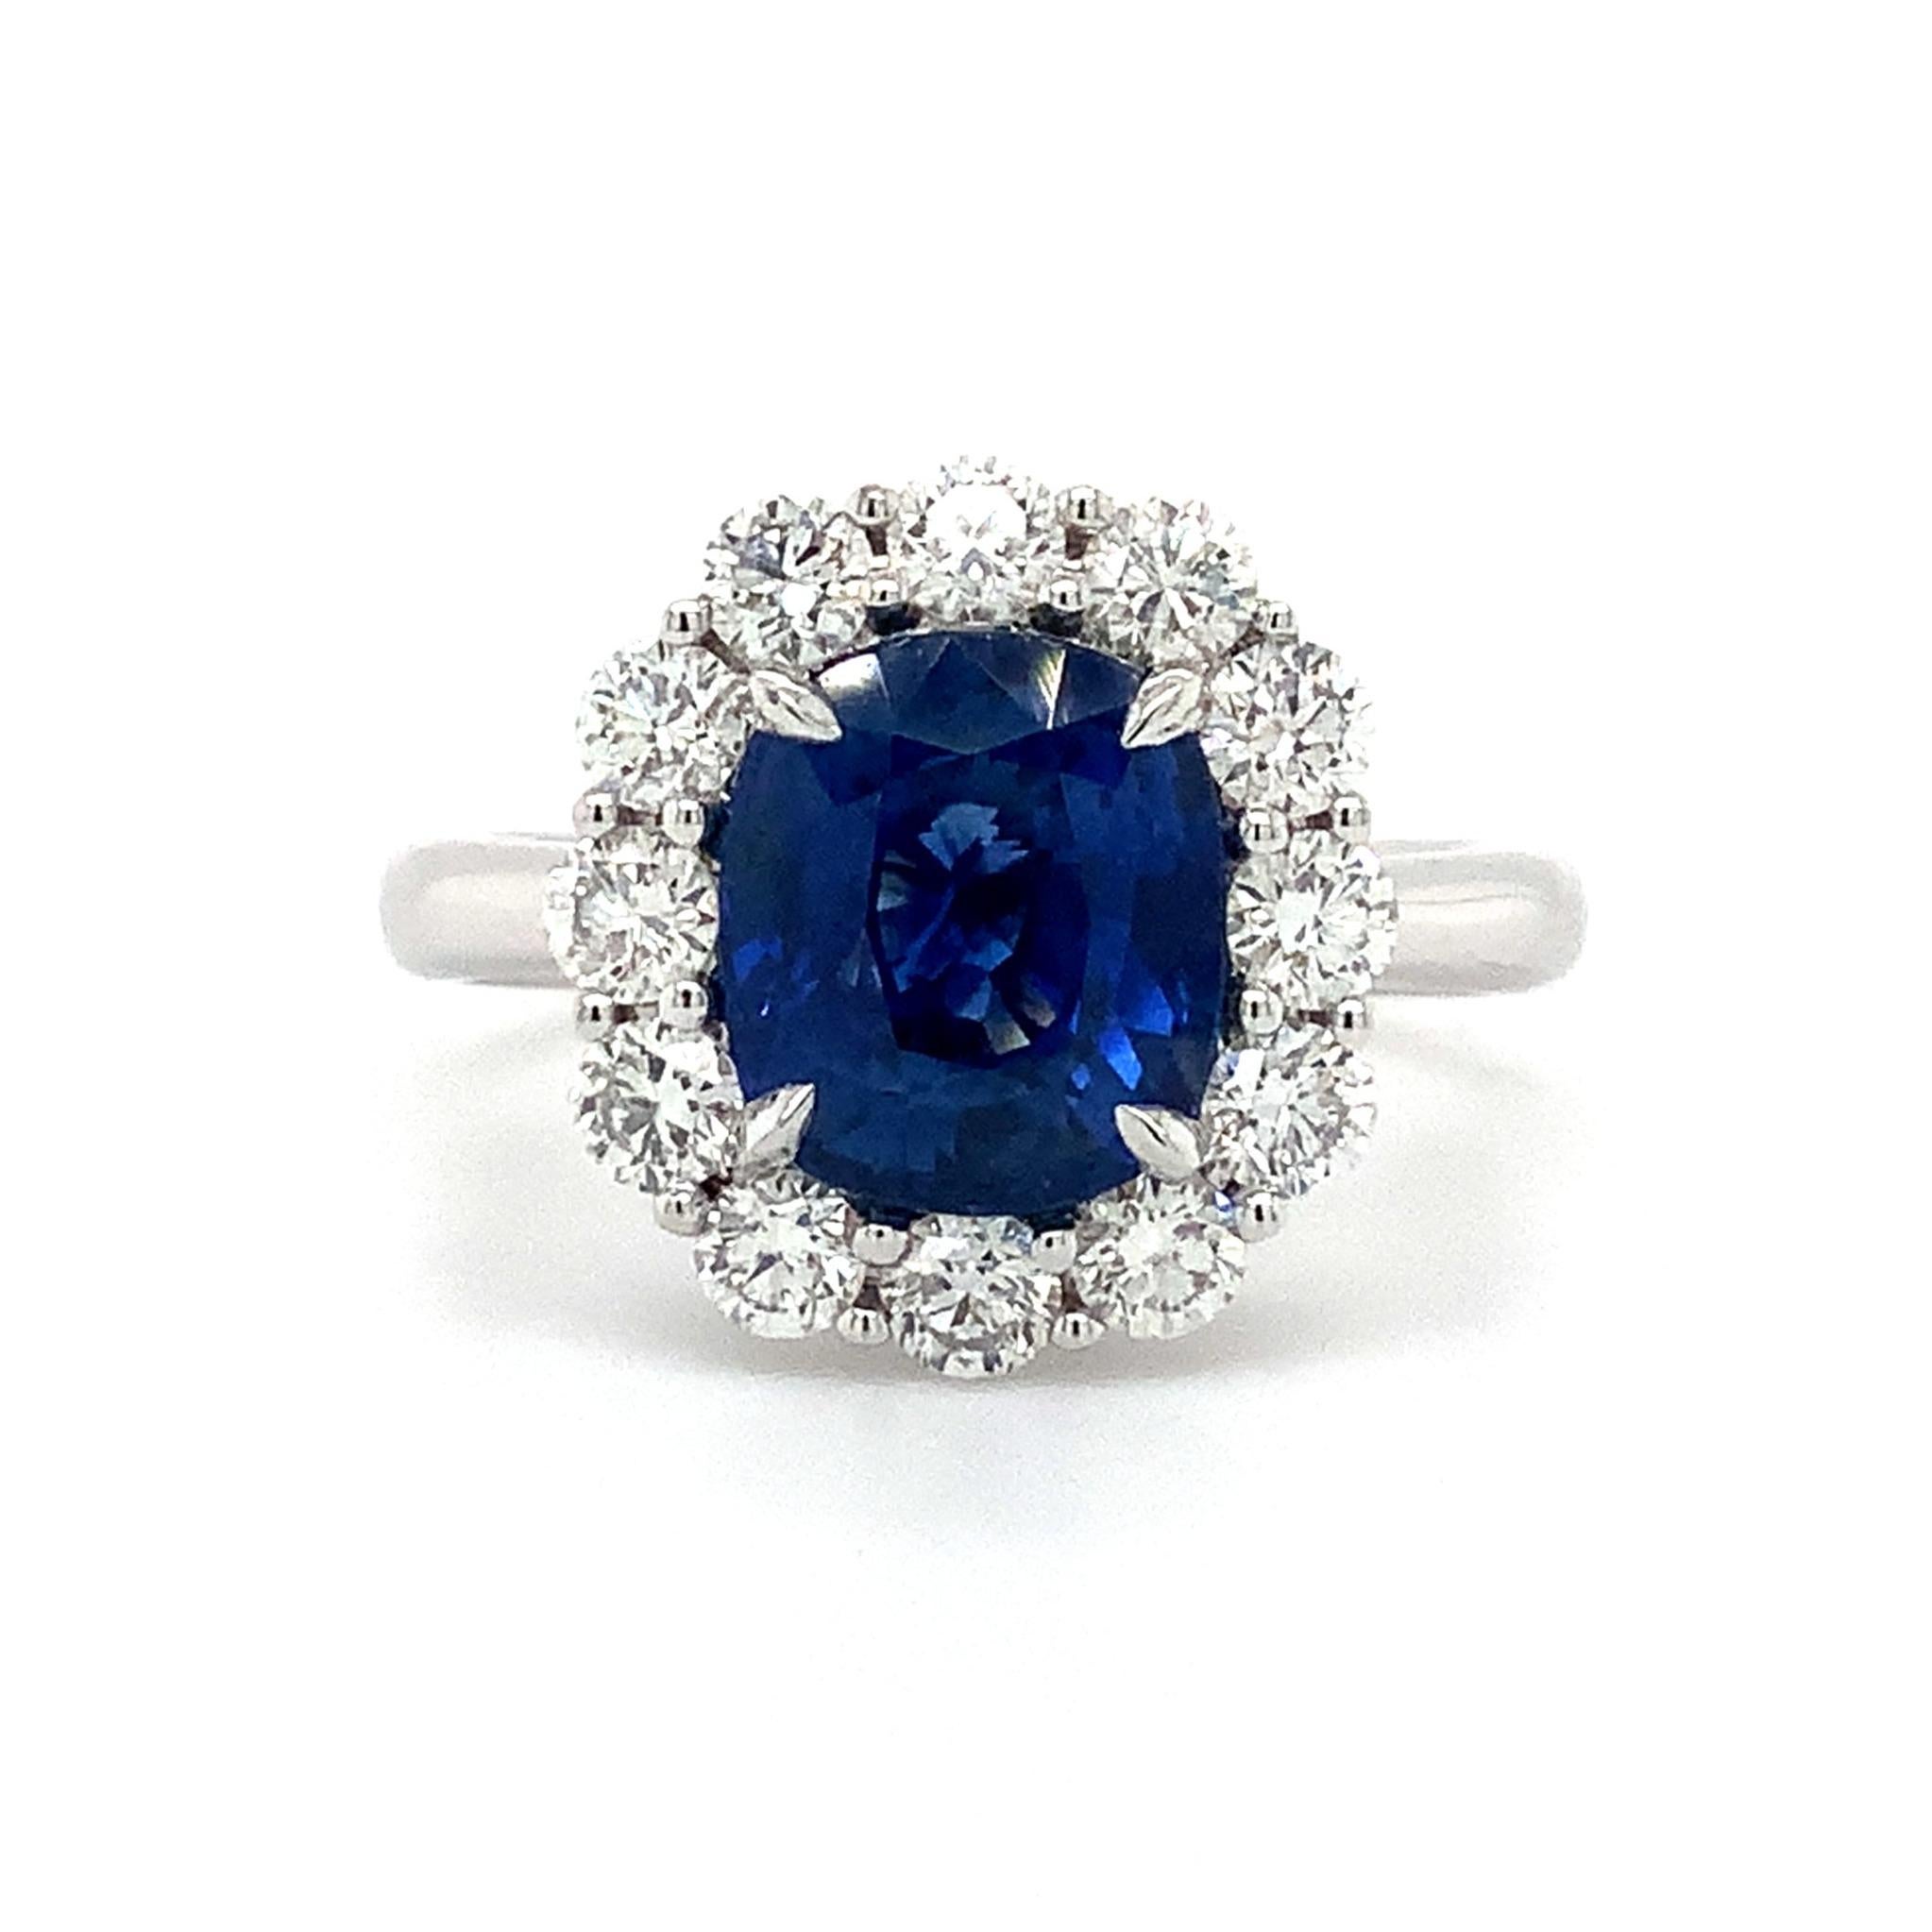 This exquisite Roman + Jules Classic Design is set with a 3.32ct Cushion Mix Cut Ceylon Blue Sapphire, accompanied by 26 Round Brilliant Cut Diamonds, all set in 18 Karat White Gold. The delicate Fillagree Gallery and melee diamonds set at the base